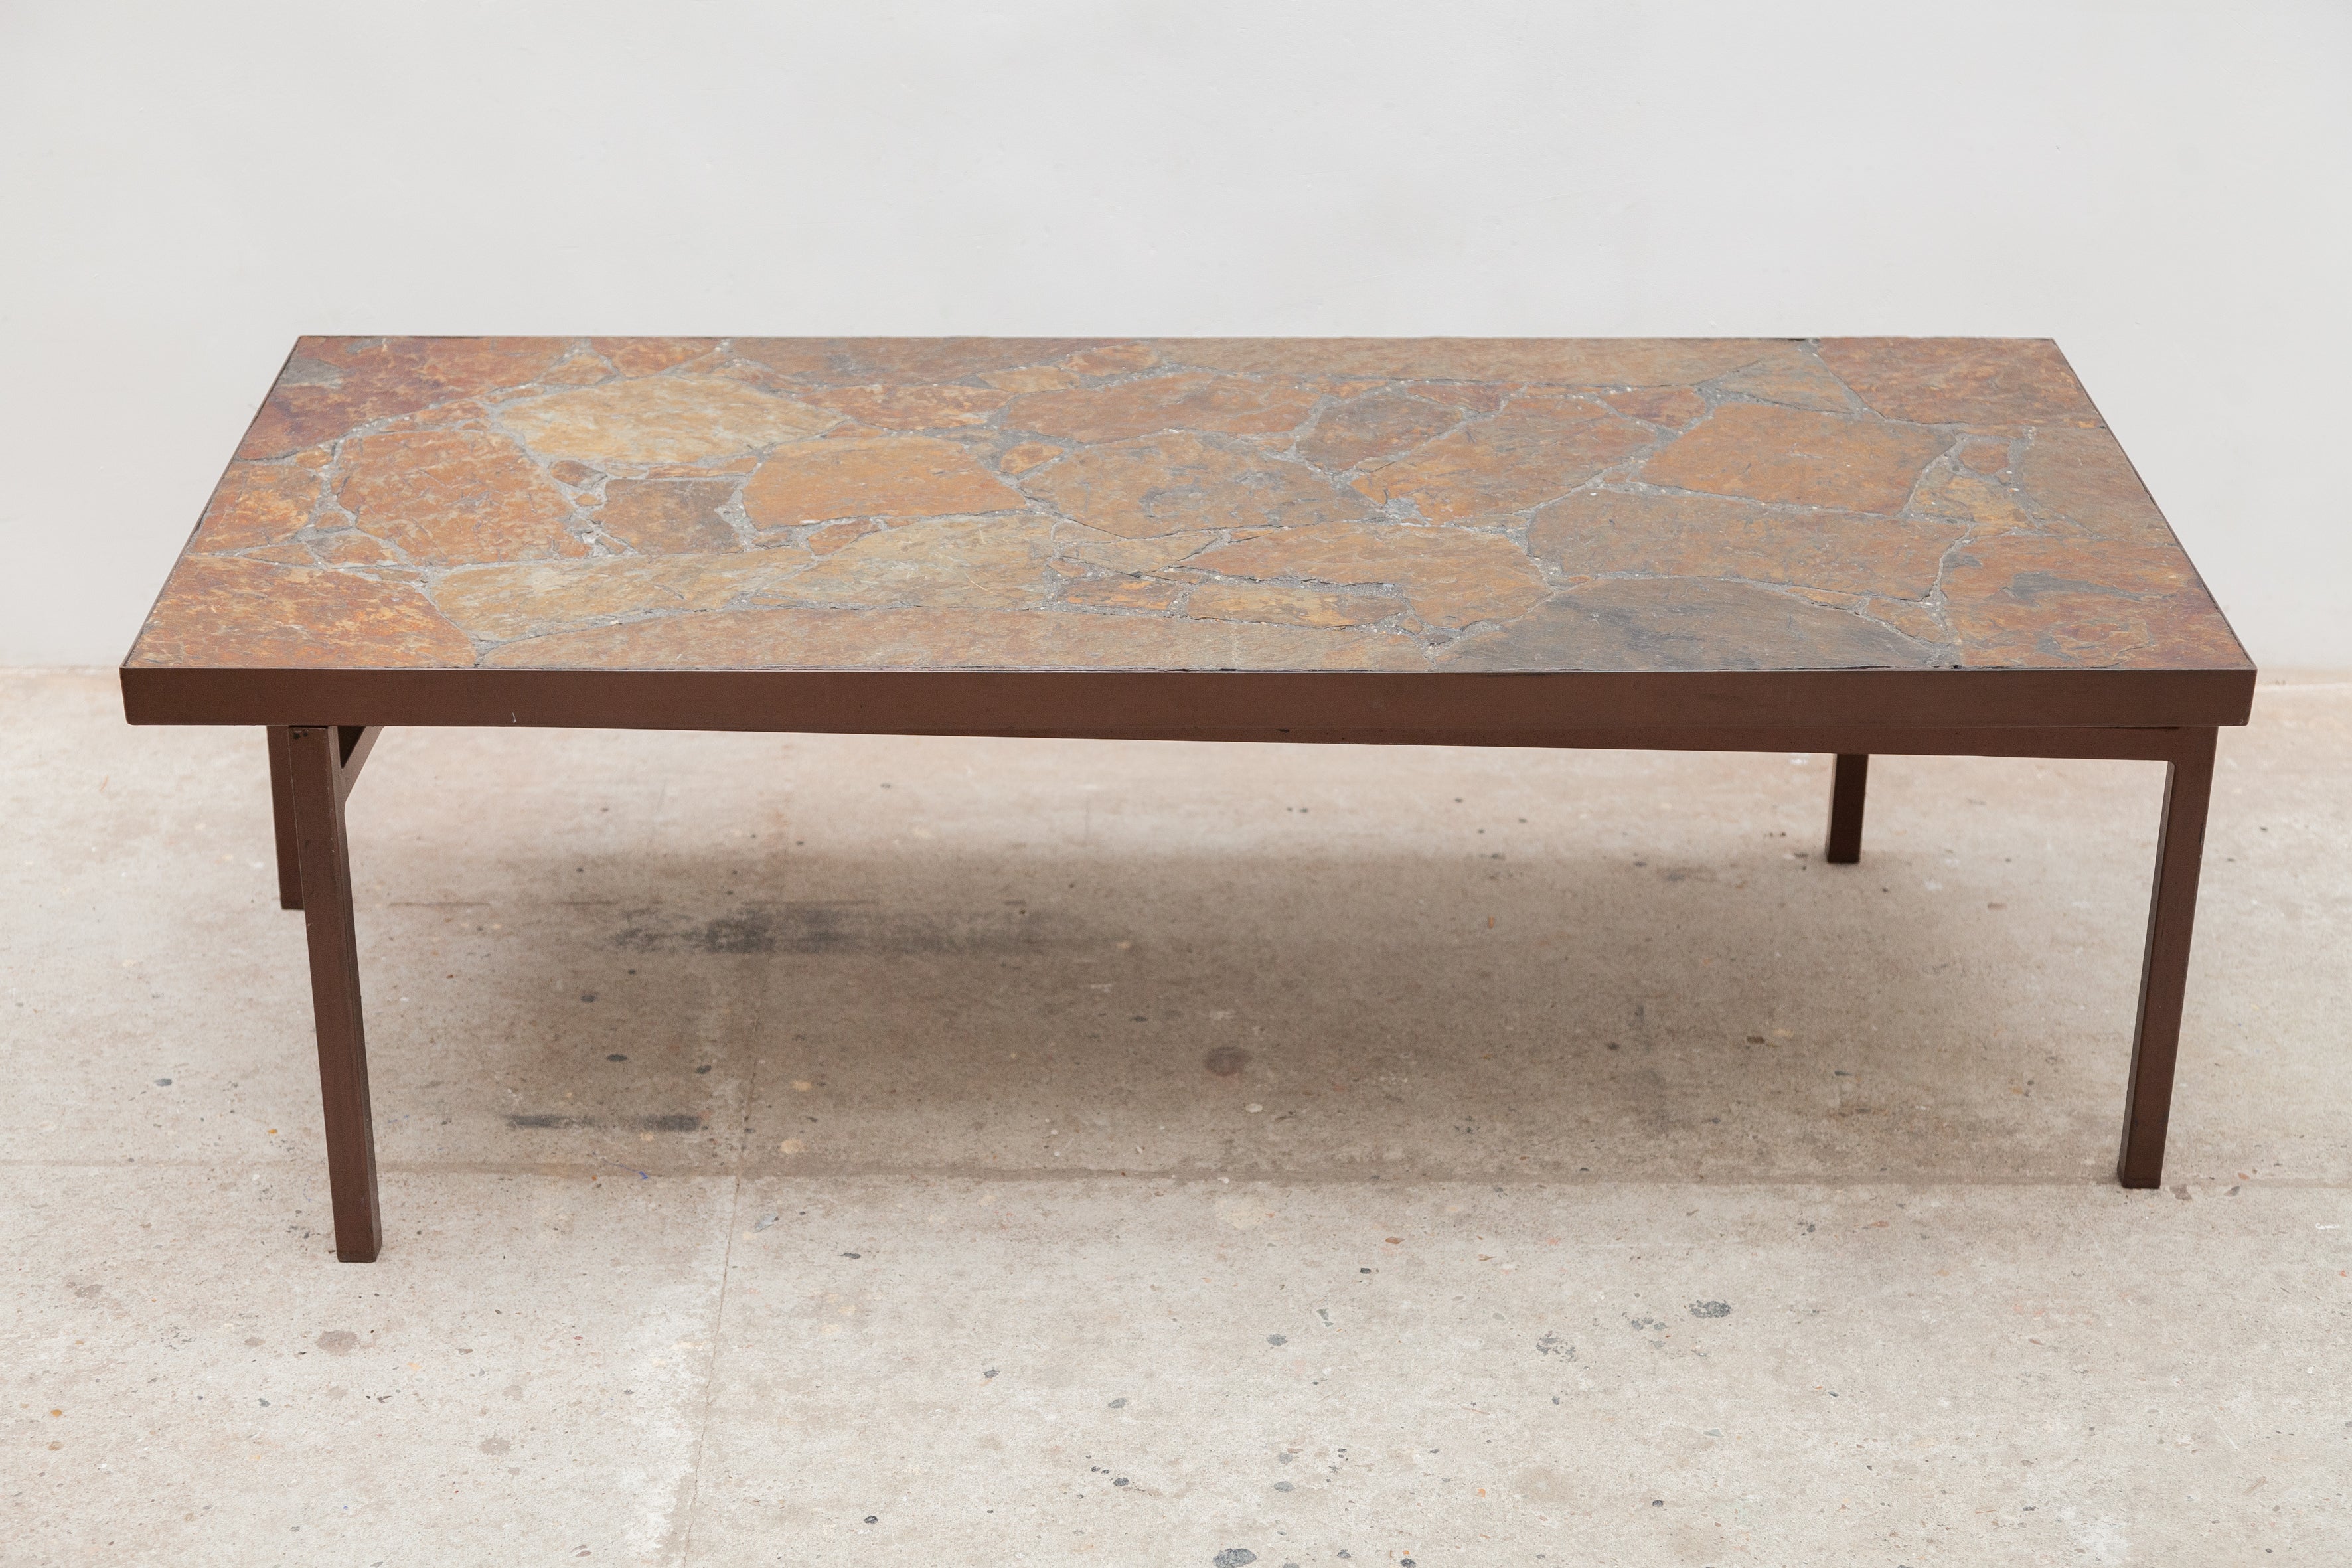 Mid-Century Modern coffee table. A slate stone brutalist coffee table designed in the 1960s. A 